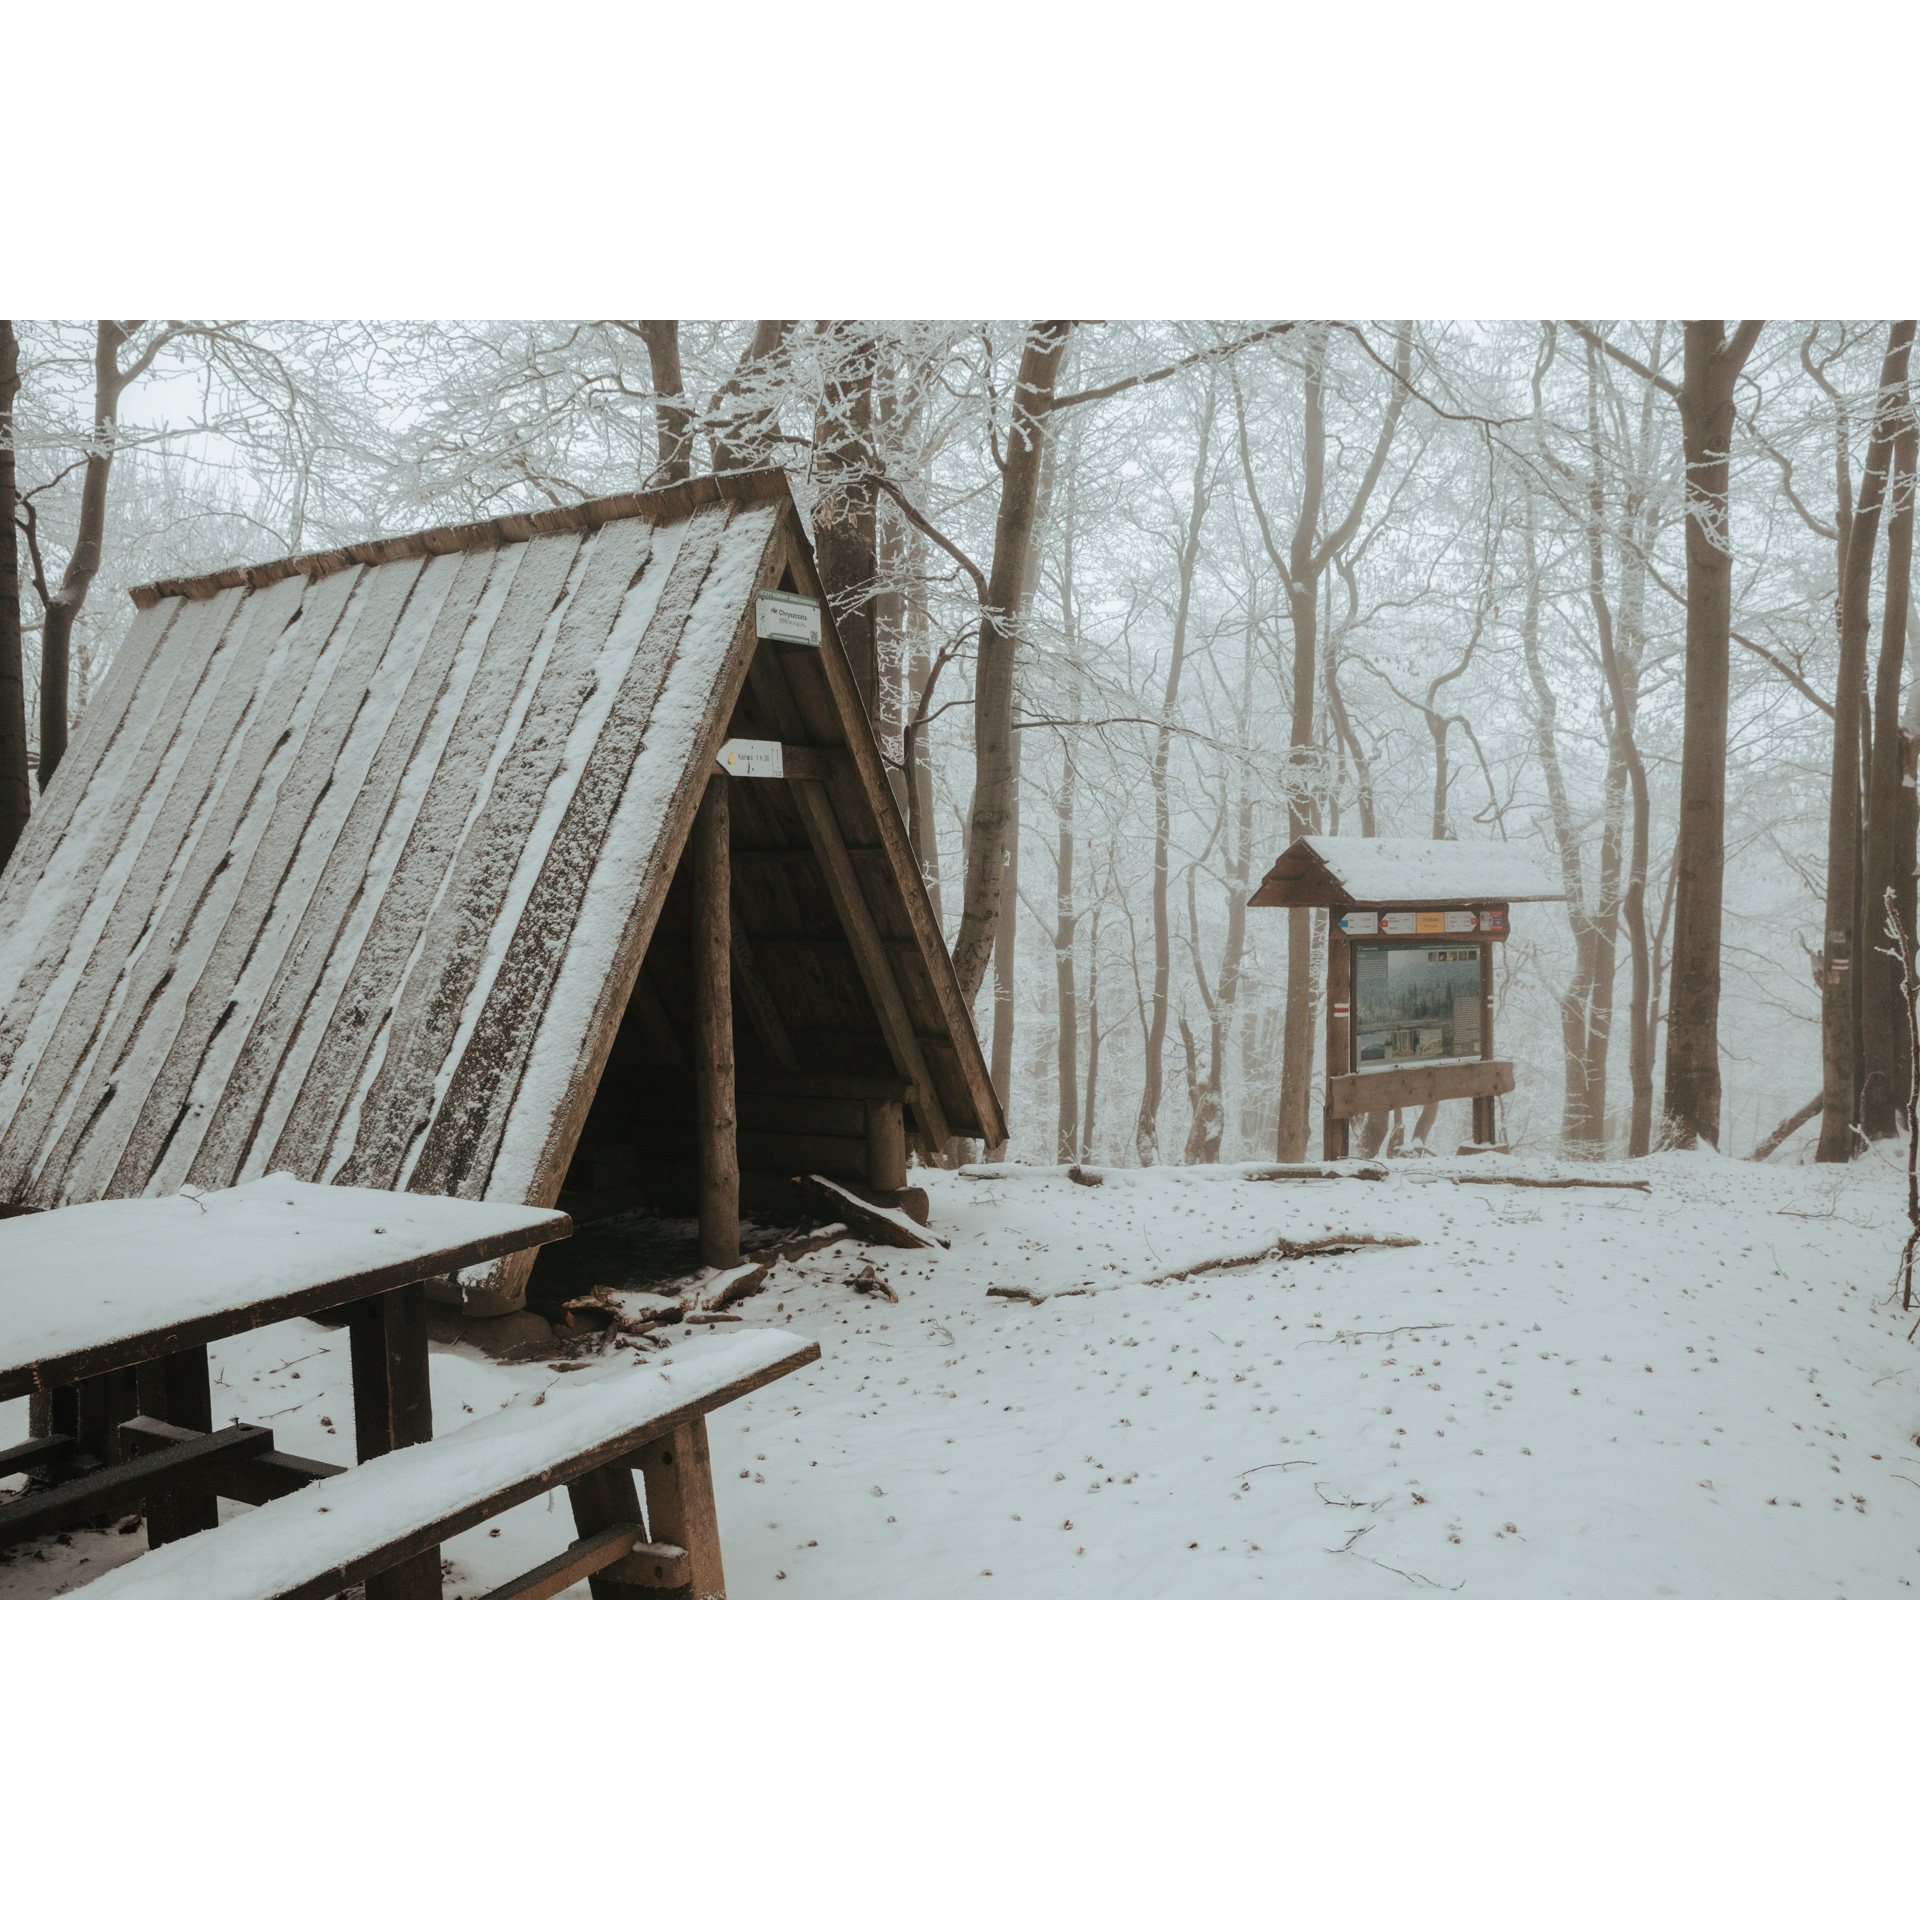 A forest, wooden shed and an information board against the background of winter trees